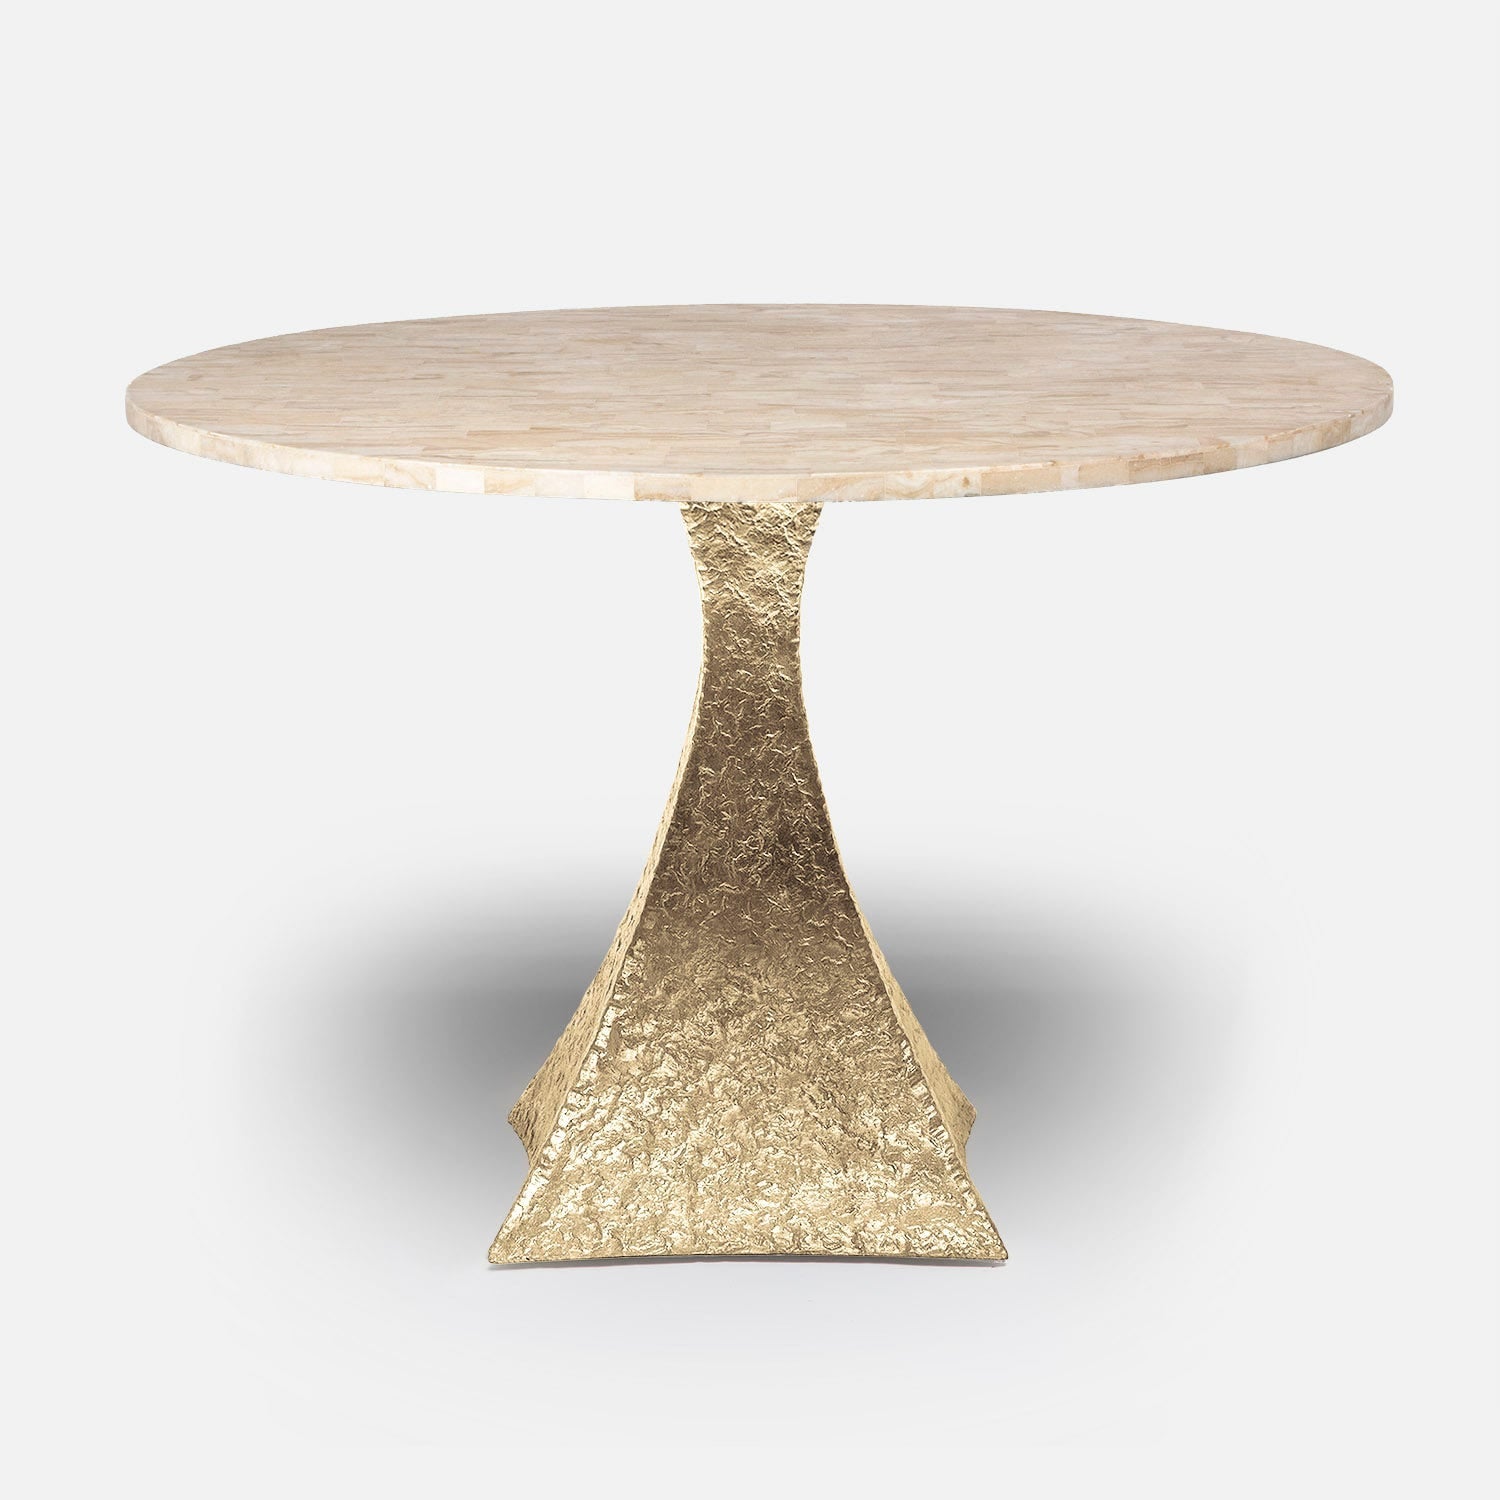 Made Goods Noor 72" x 30" Bumpy Cool Gold Iron Dinning Table With Round Beige Crystal Stone Table Top